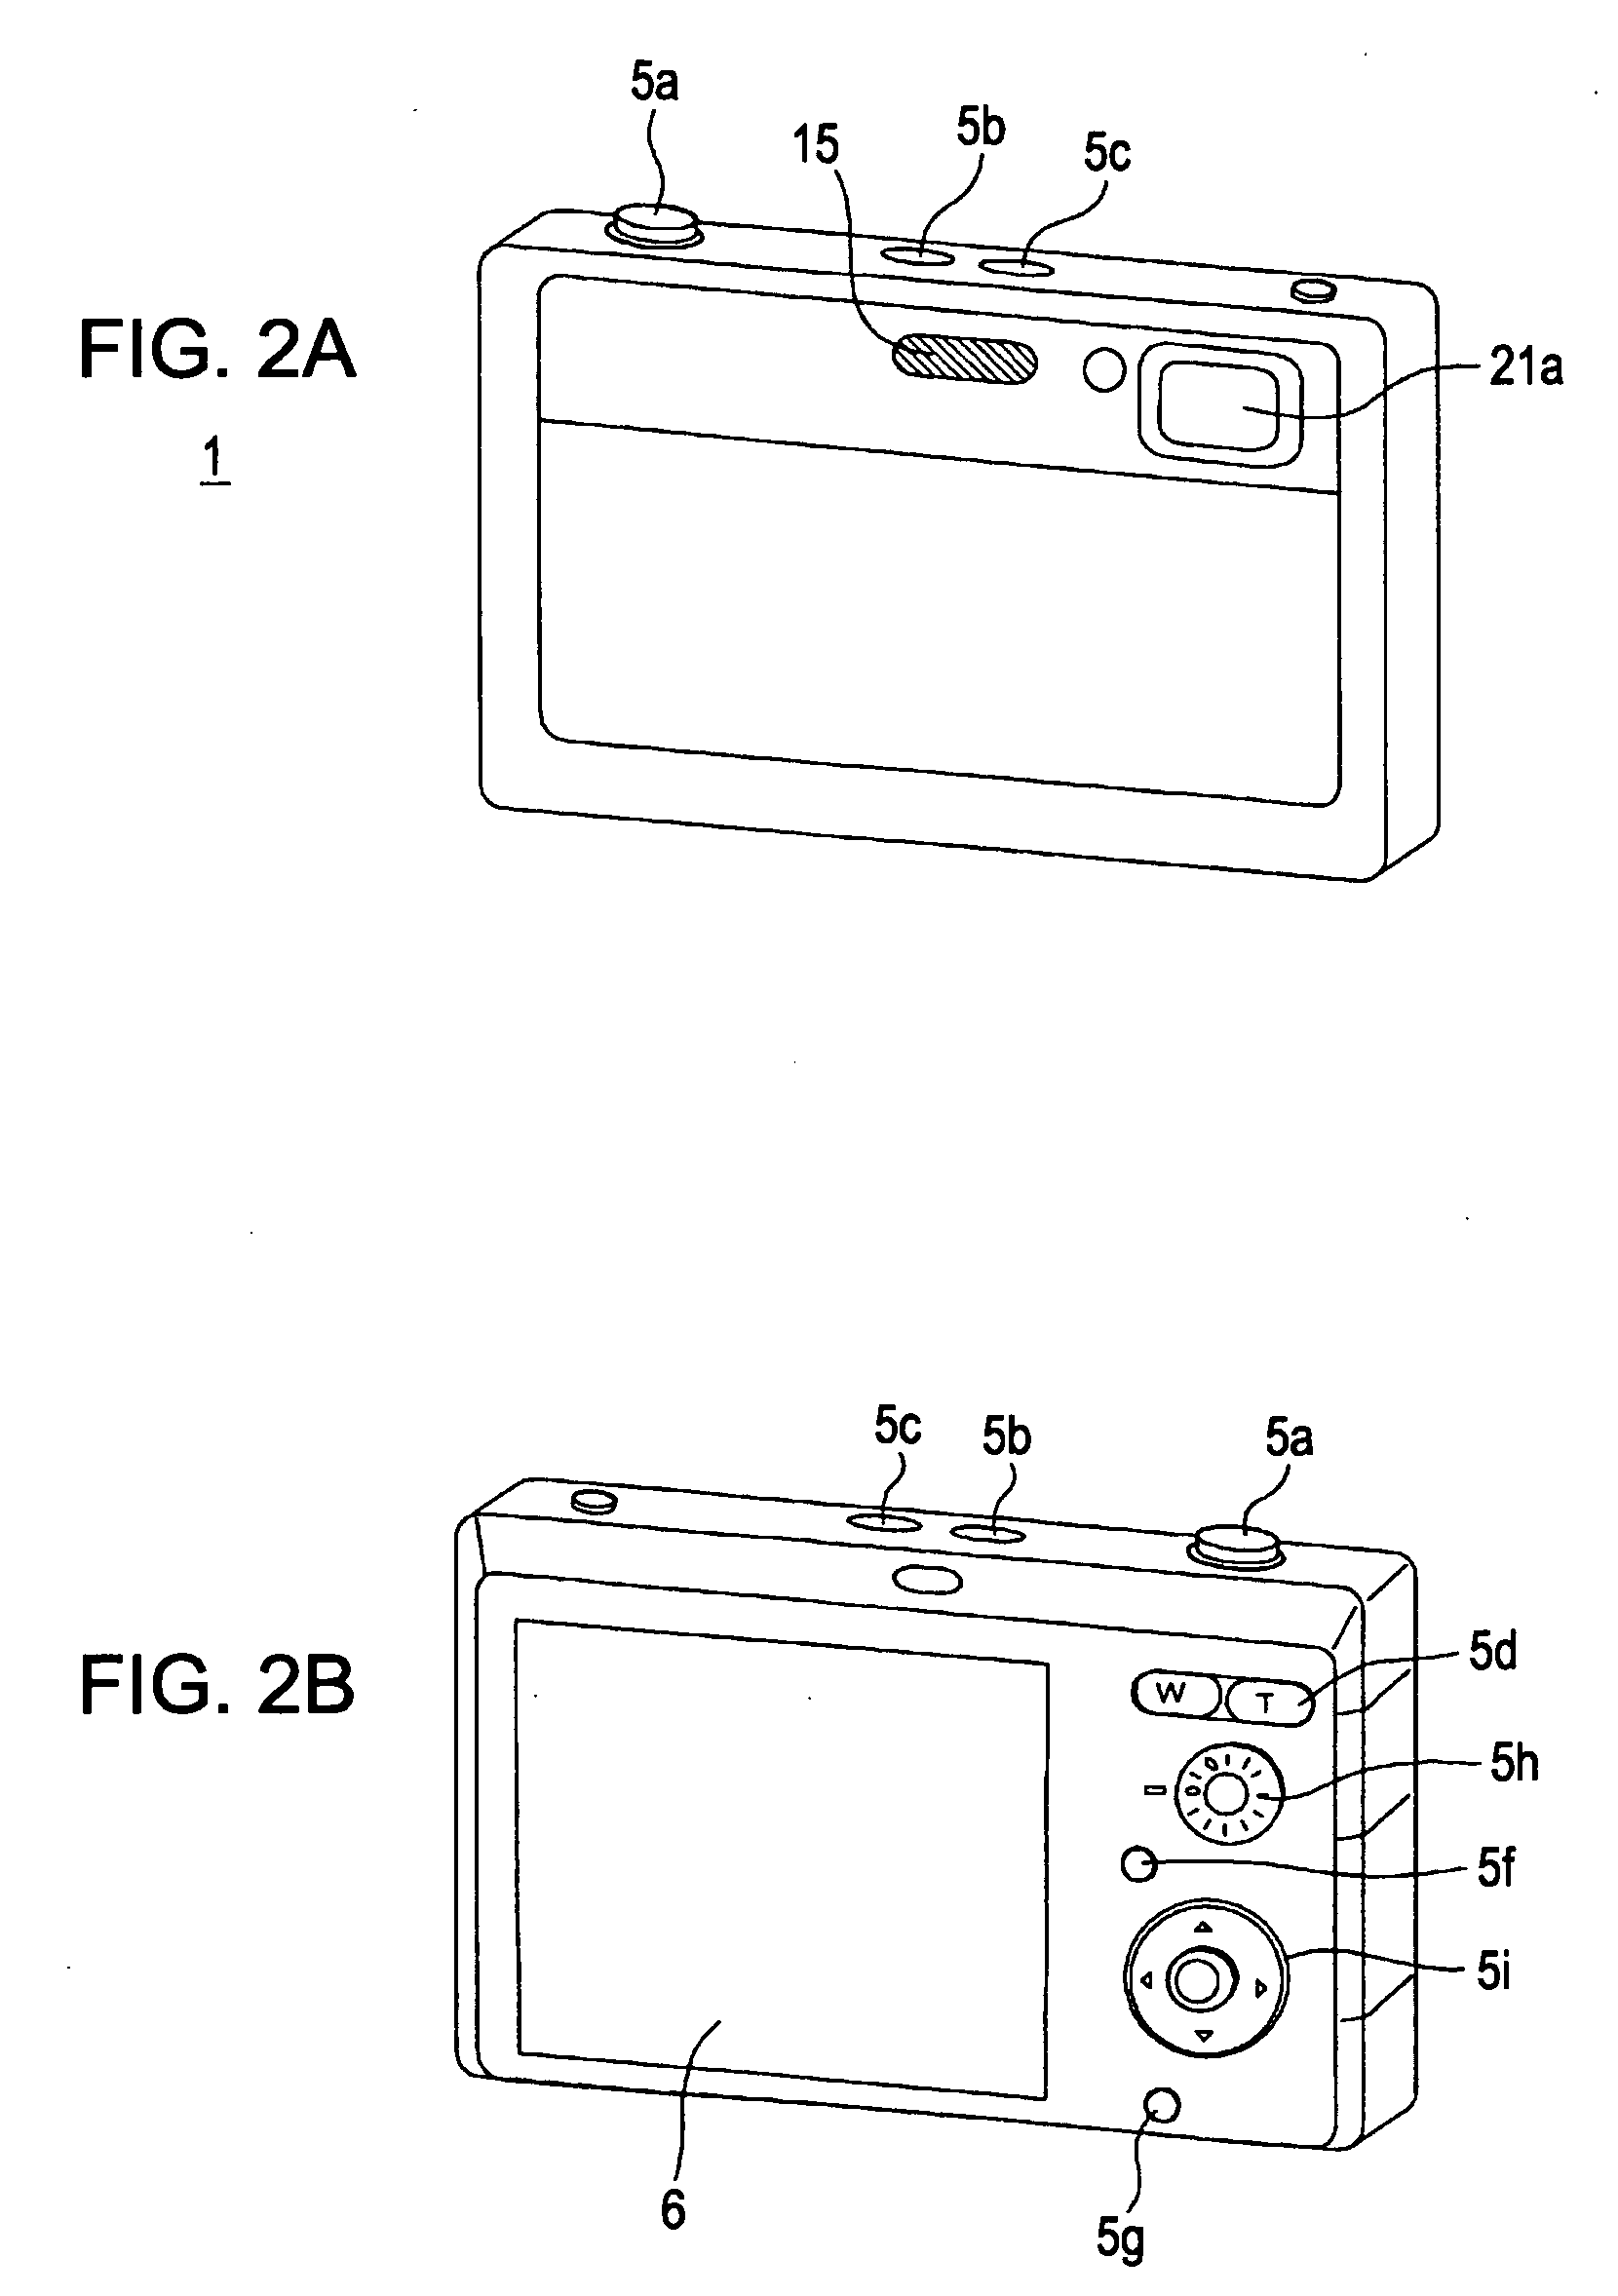 Image capture apparatus and method